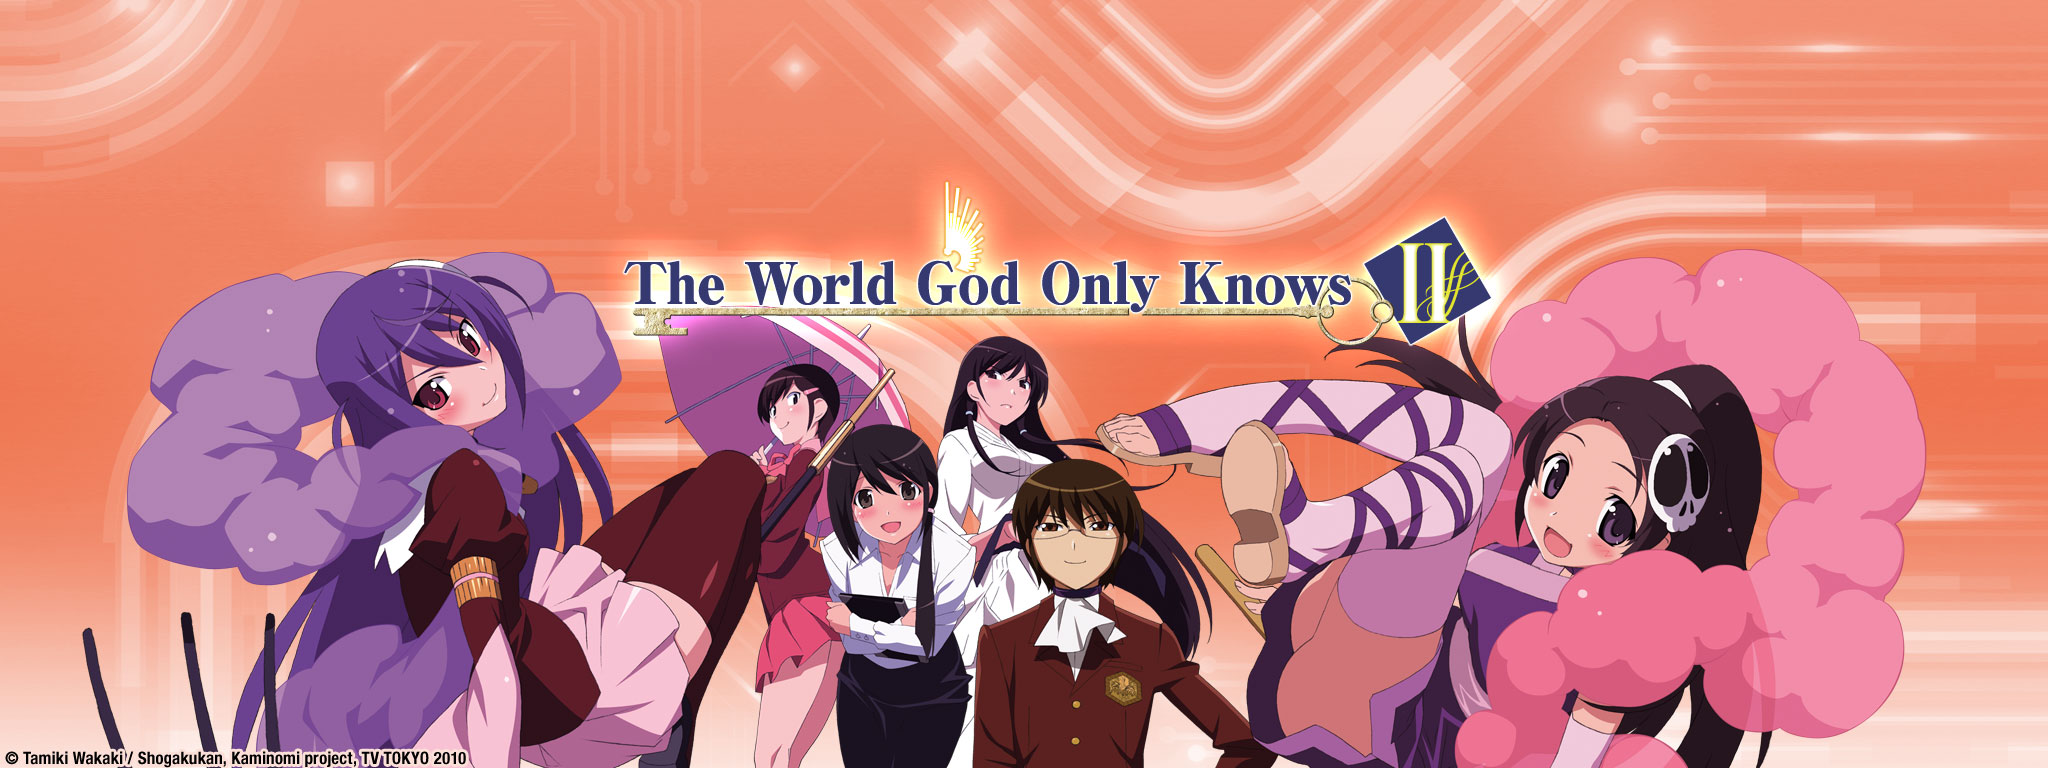 Title Art for The World God Only Knows II